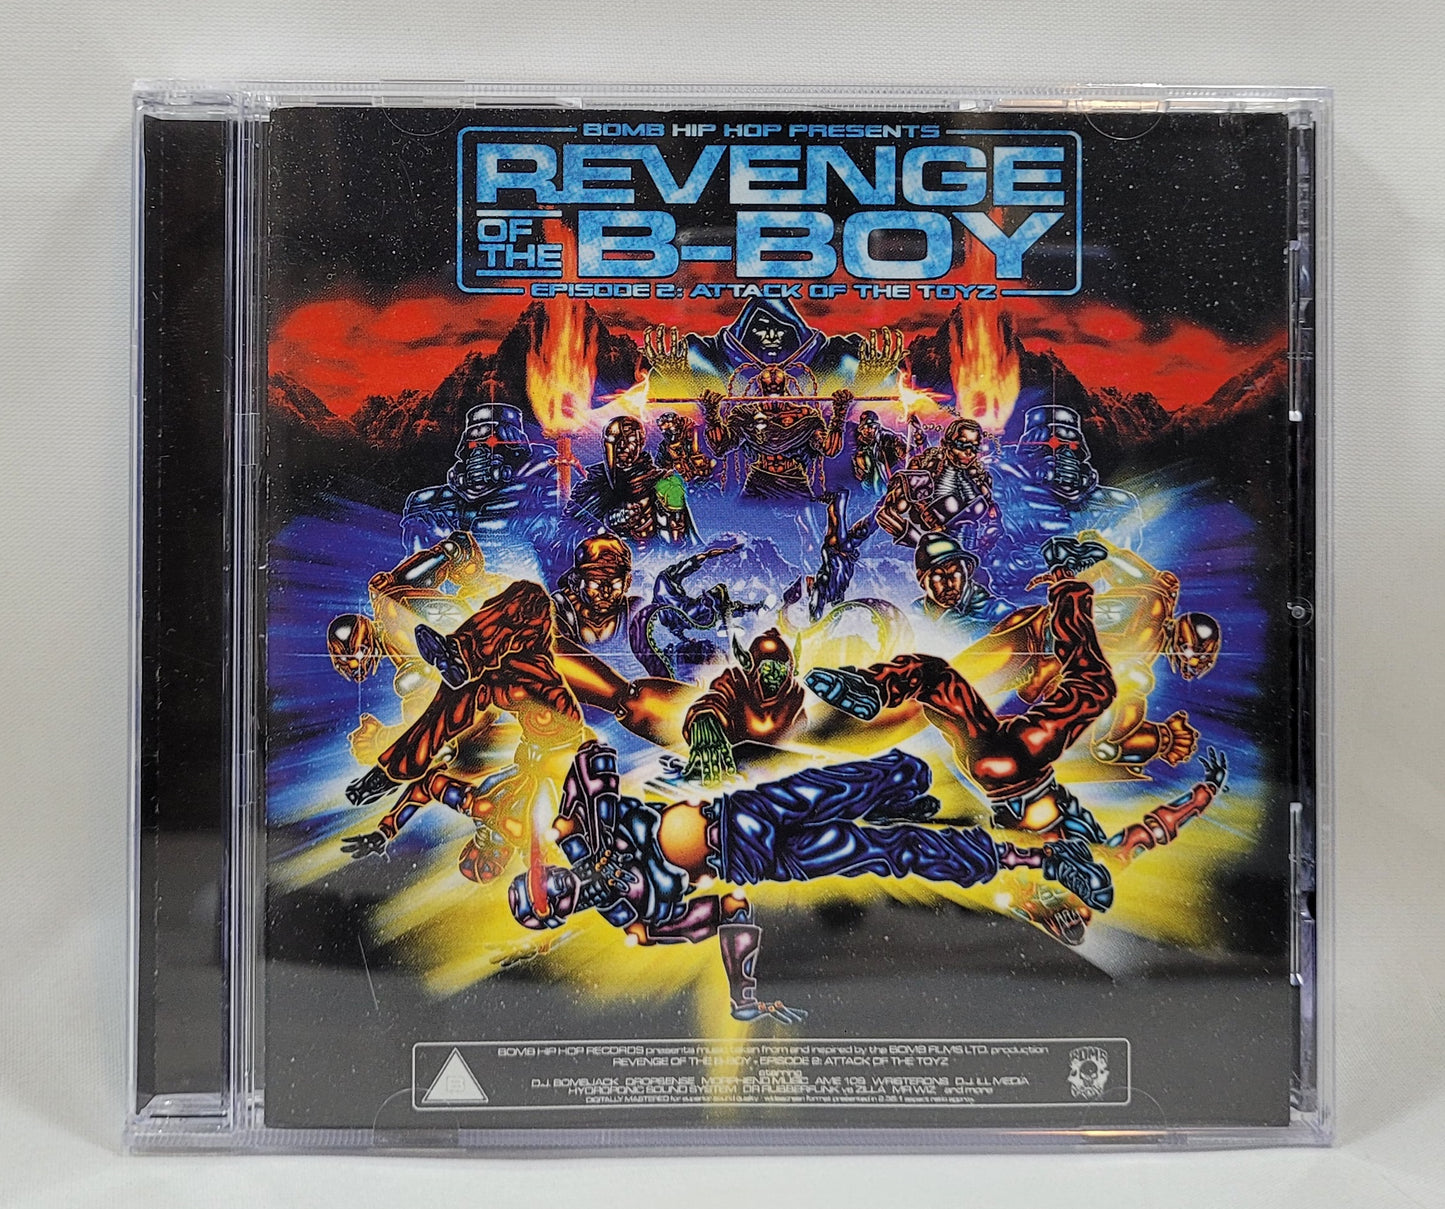 Various - Revenge of the B-Boy - Episode 2: Attack of the Toyz [2002 Used CD]